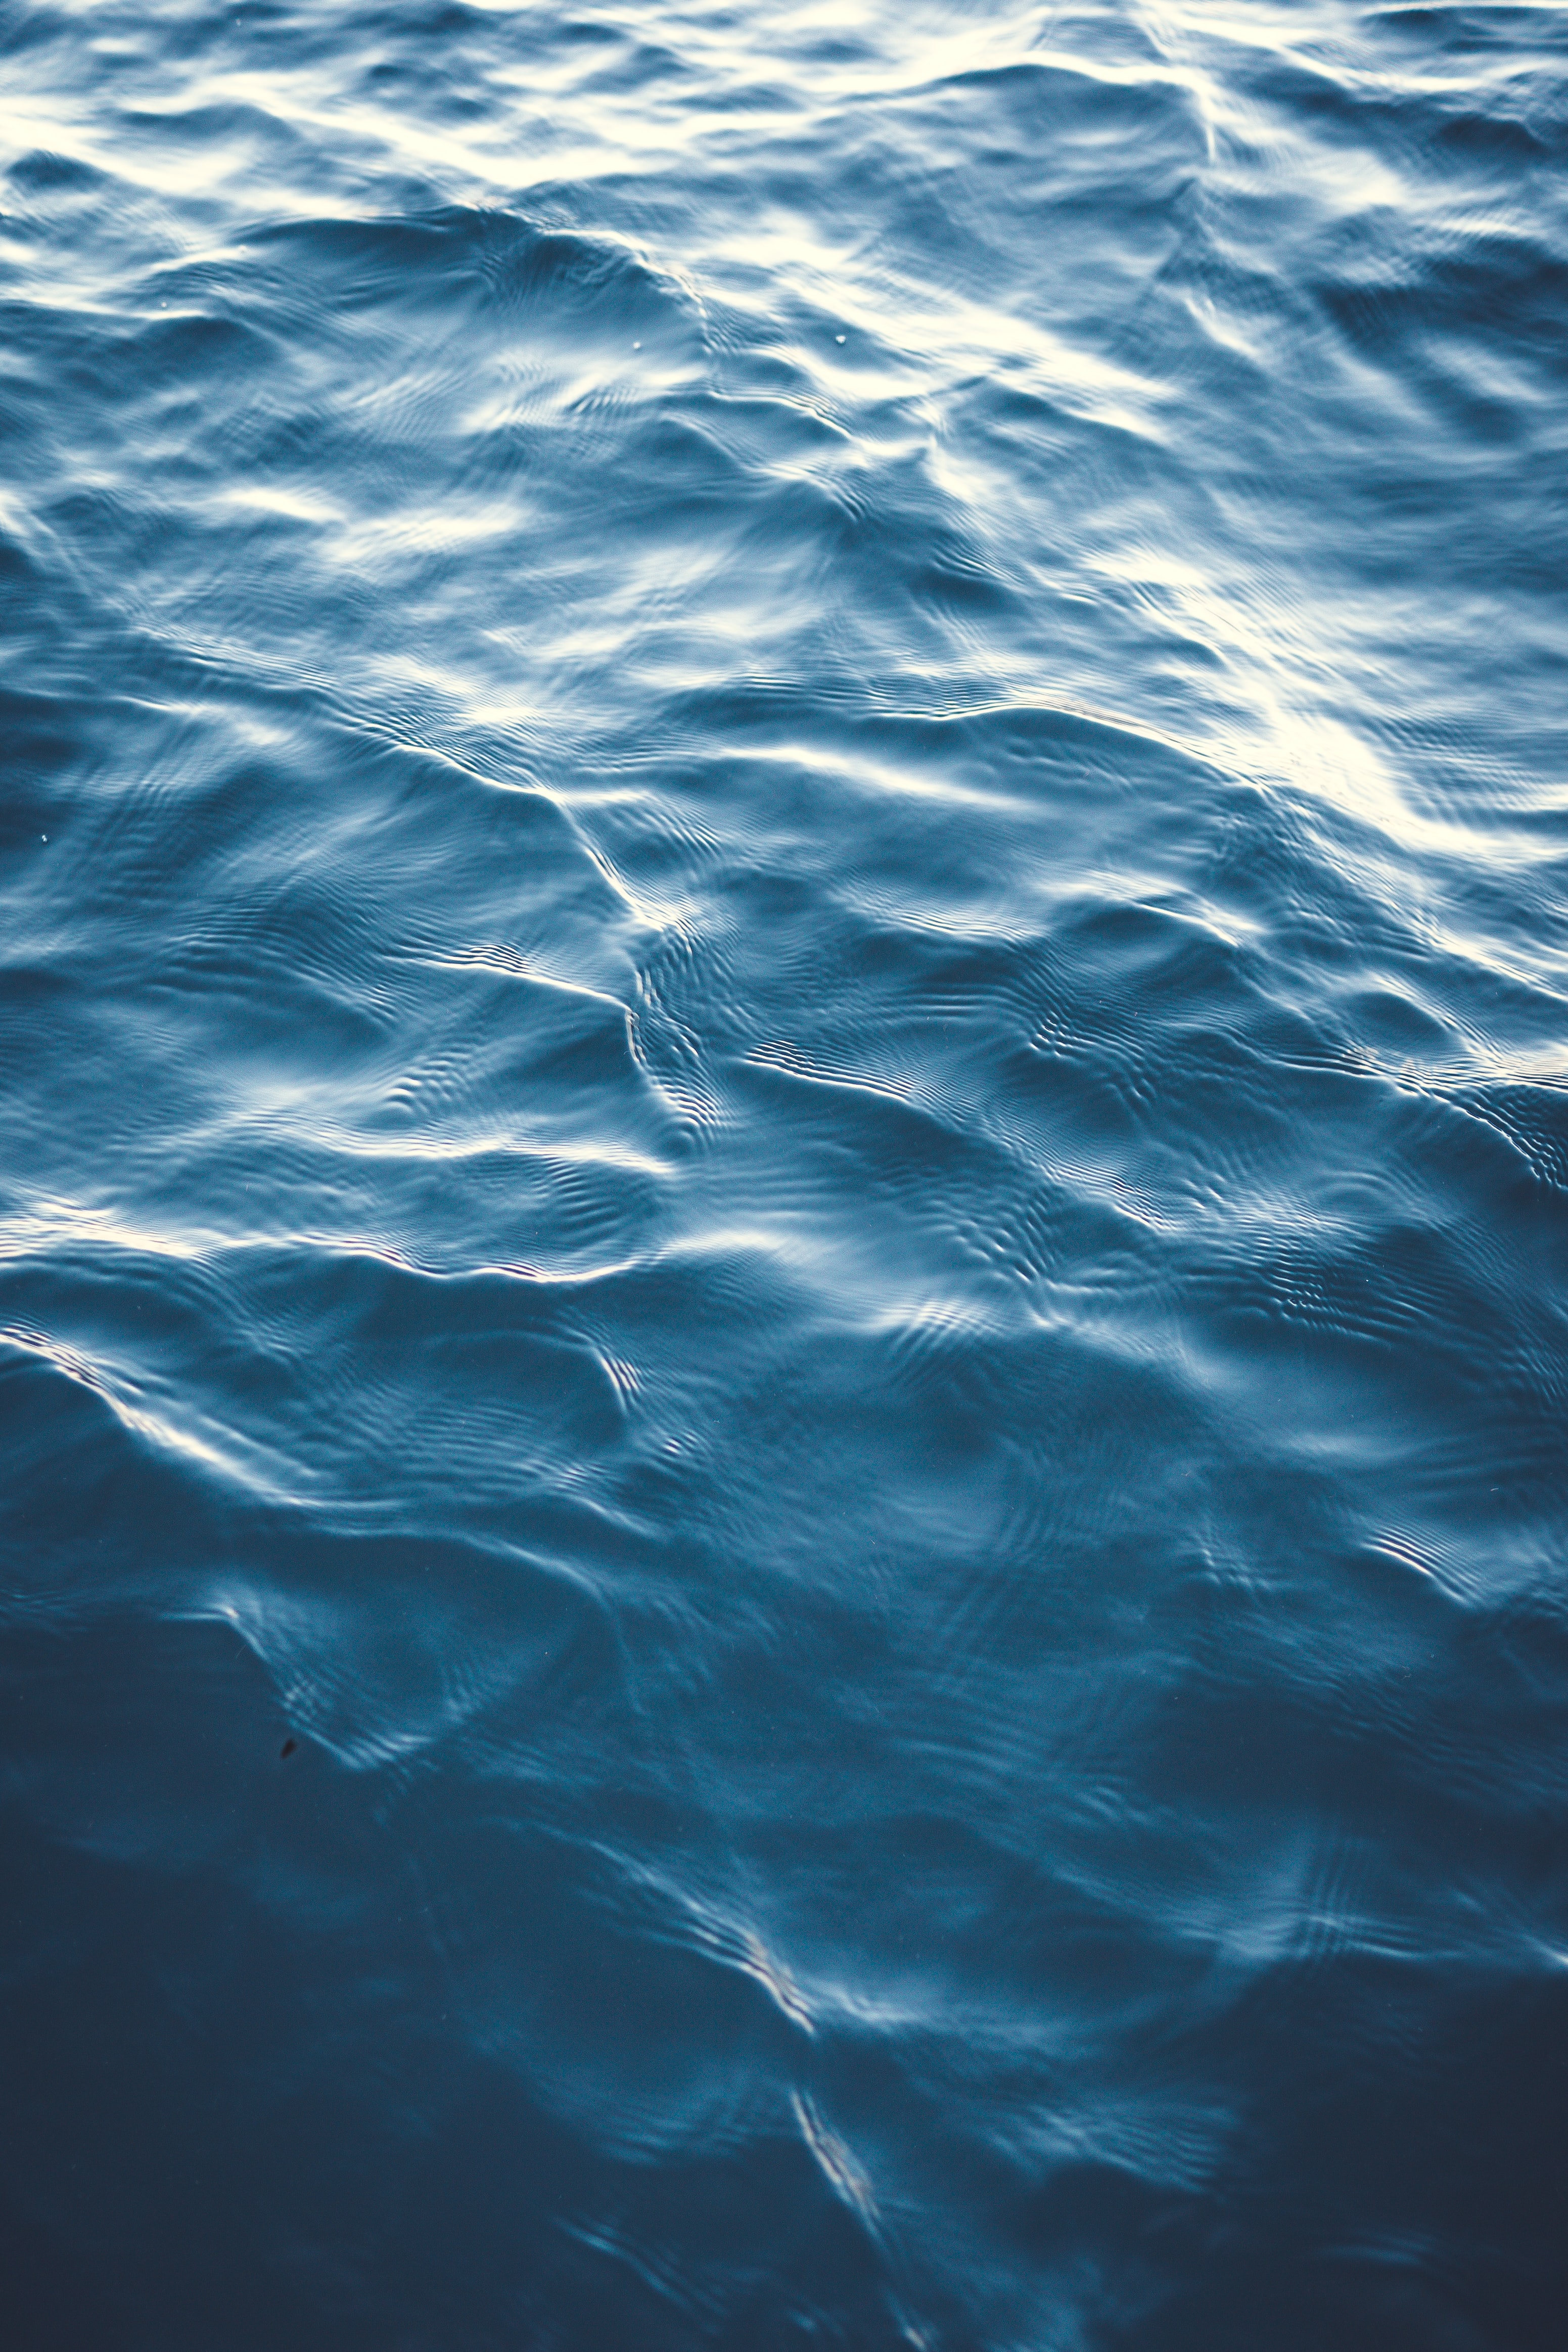 textures, texture, ripples, water, waves, ripple, wavy, distortion lock screen backgrounds